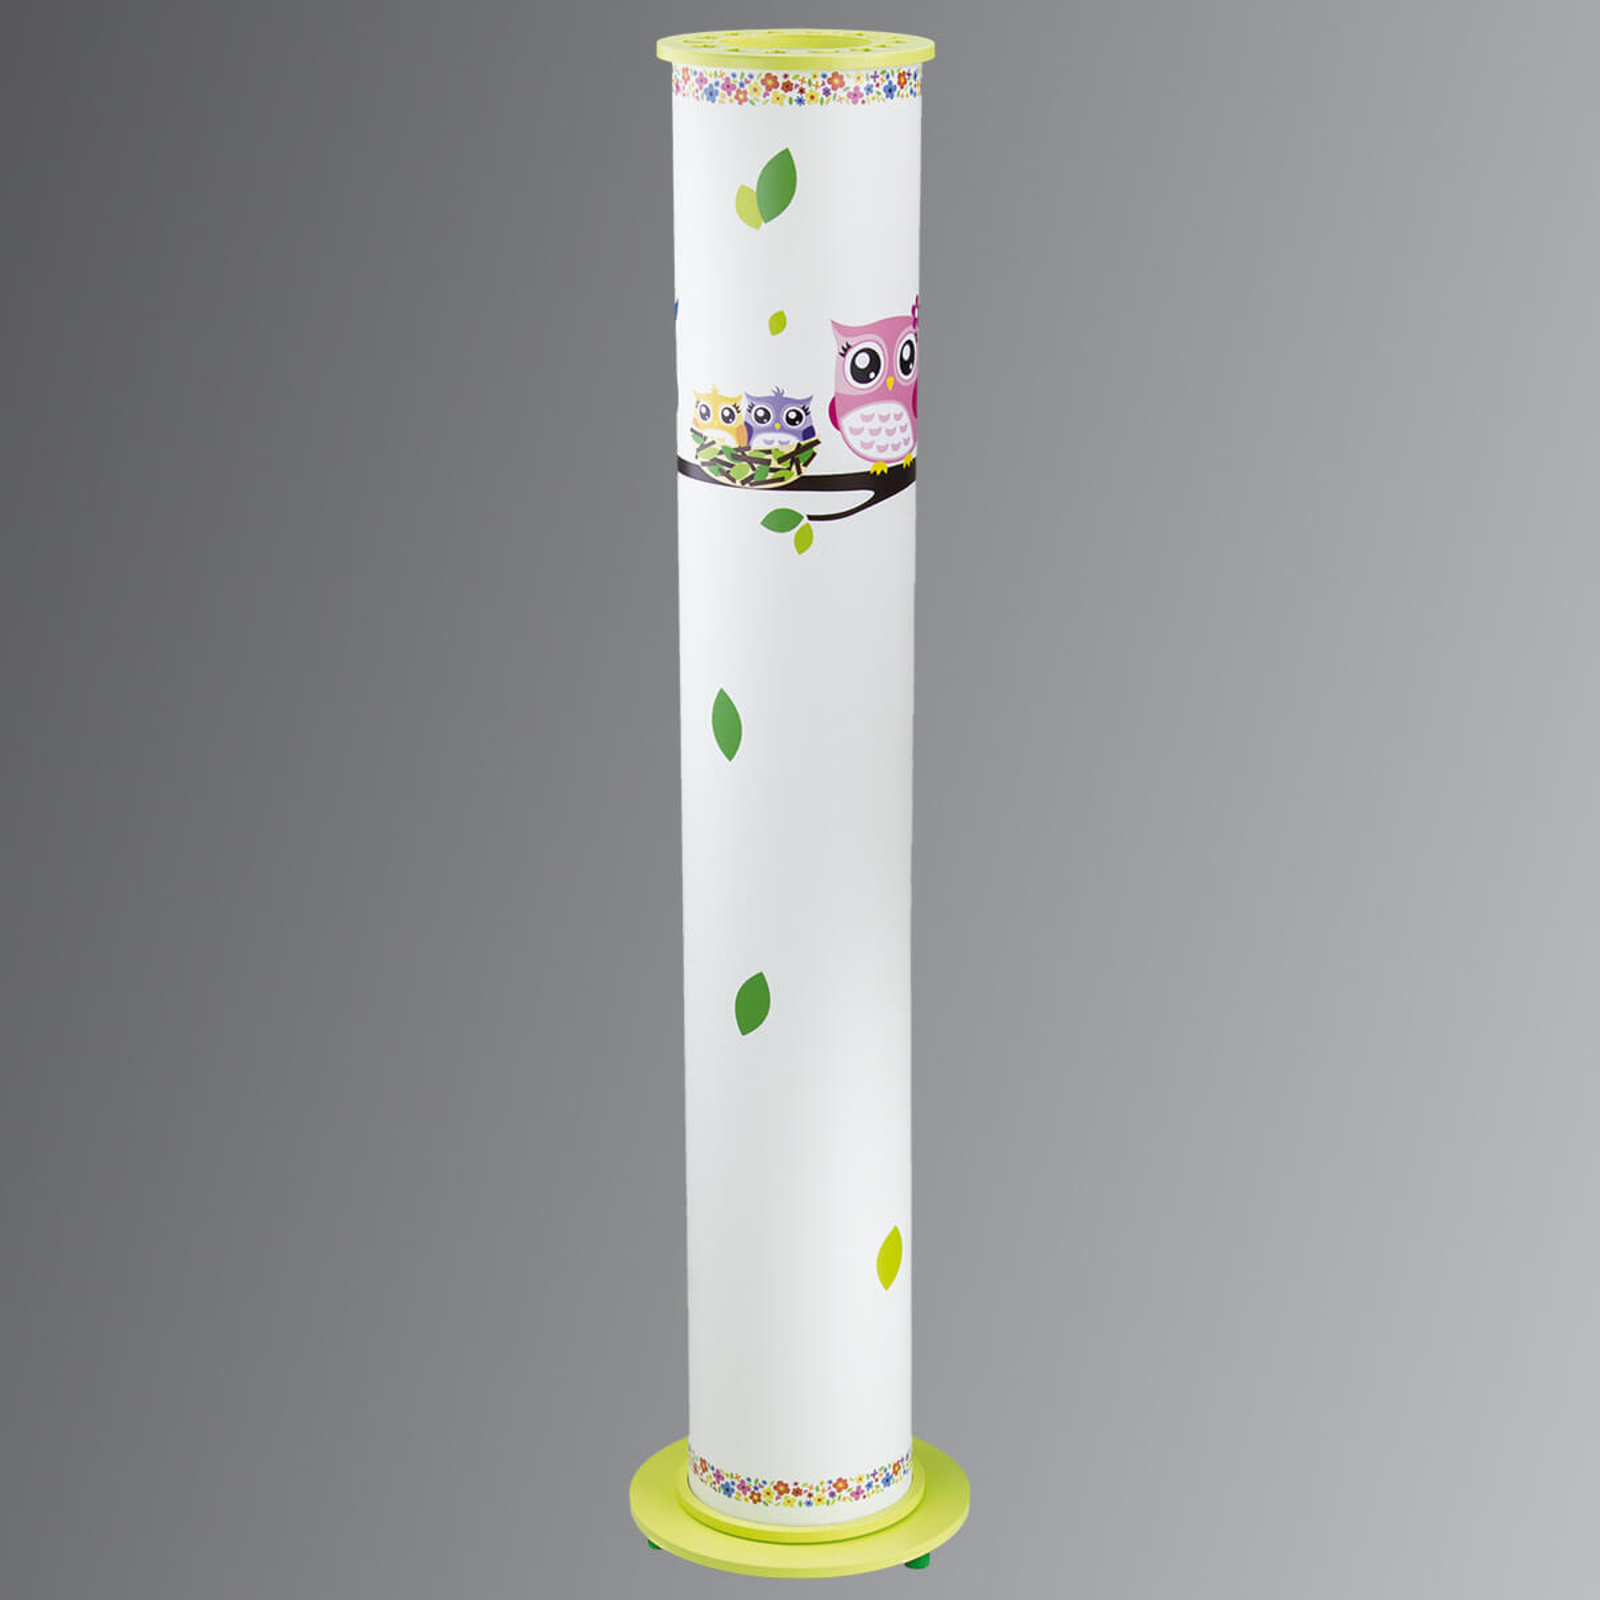 Owl floor lamp for a child’s room, white and green